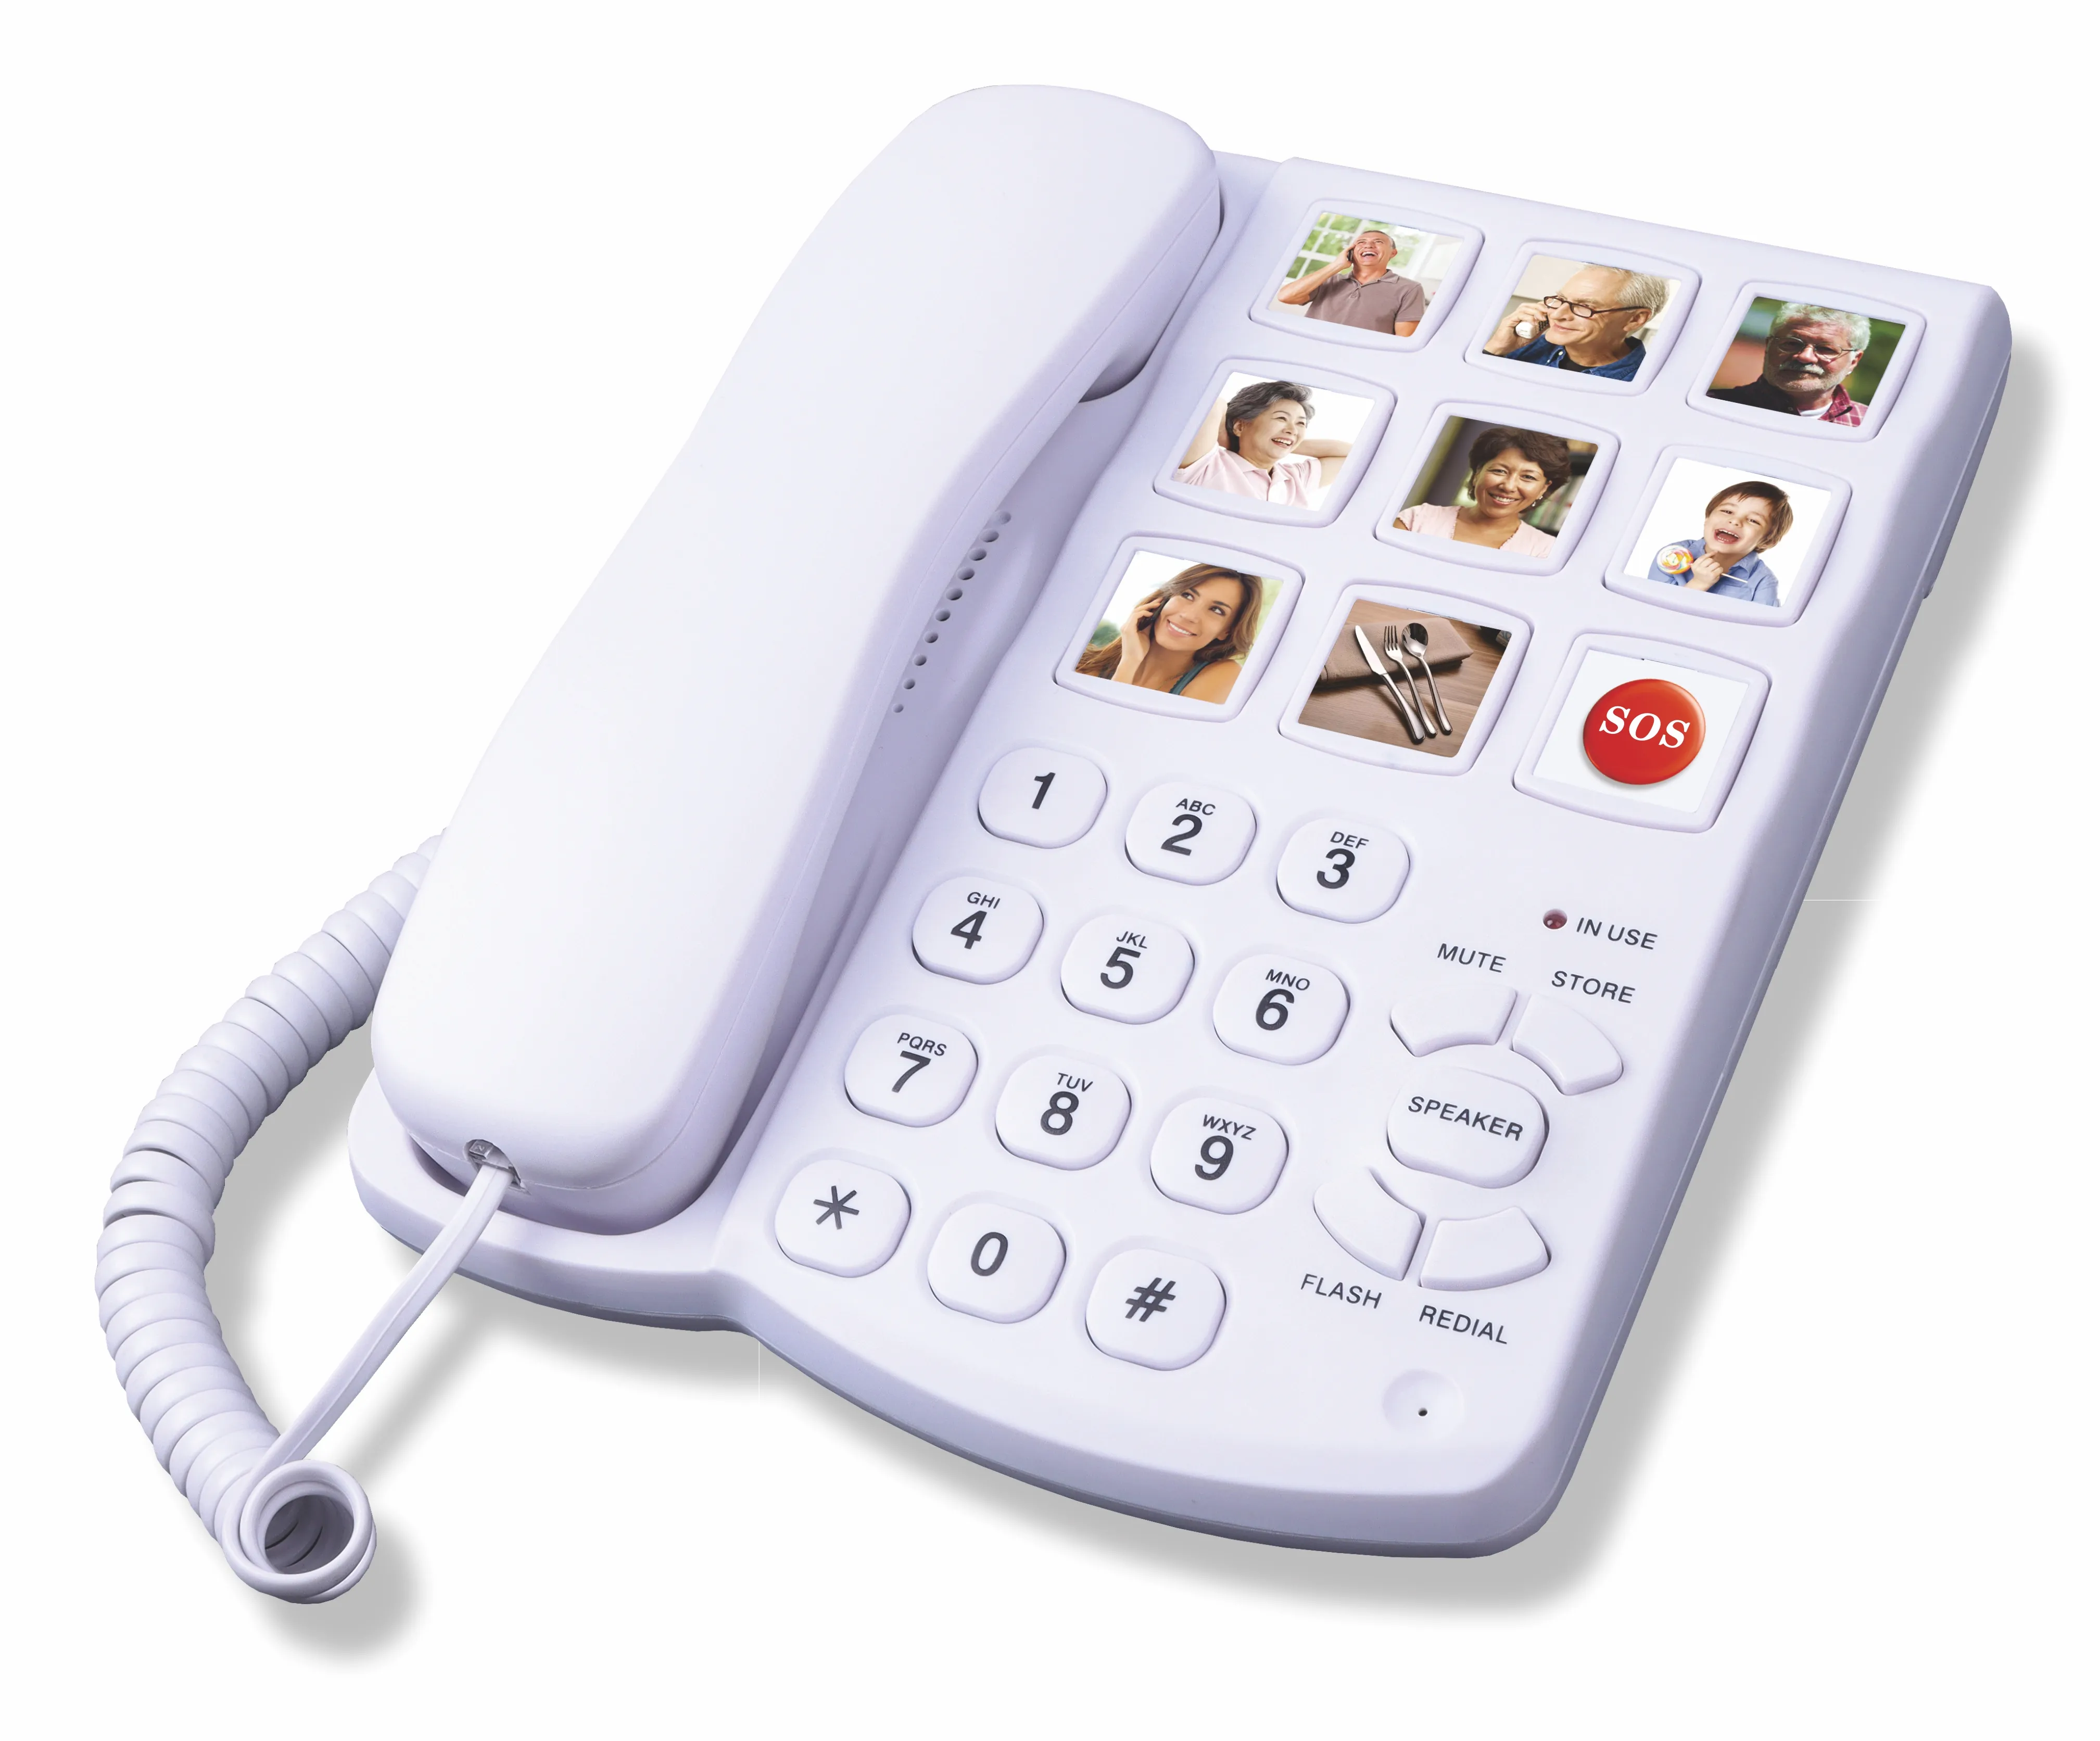 Big Button Landline SOS Telephone, Fixed Corded Phone with Caller ID LCD Display Flash Function DTMF/FSK Landline for Elderly